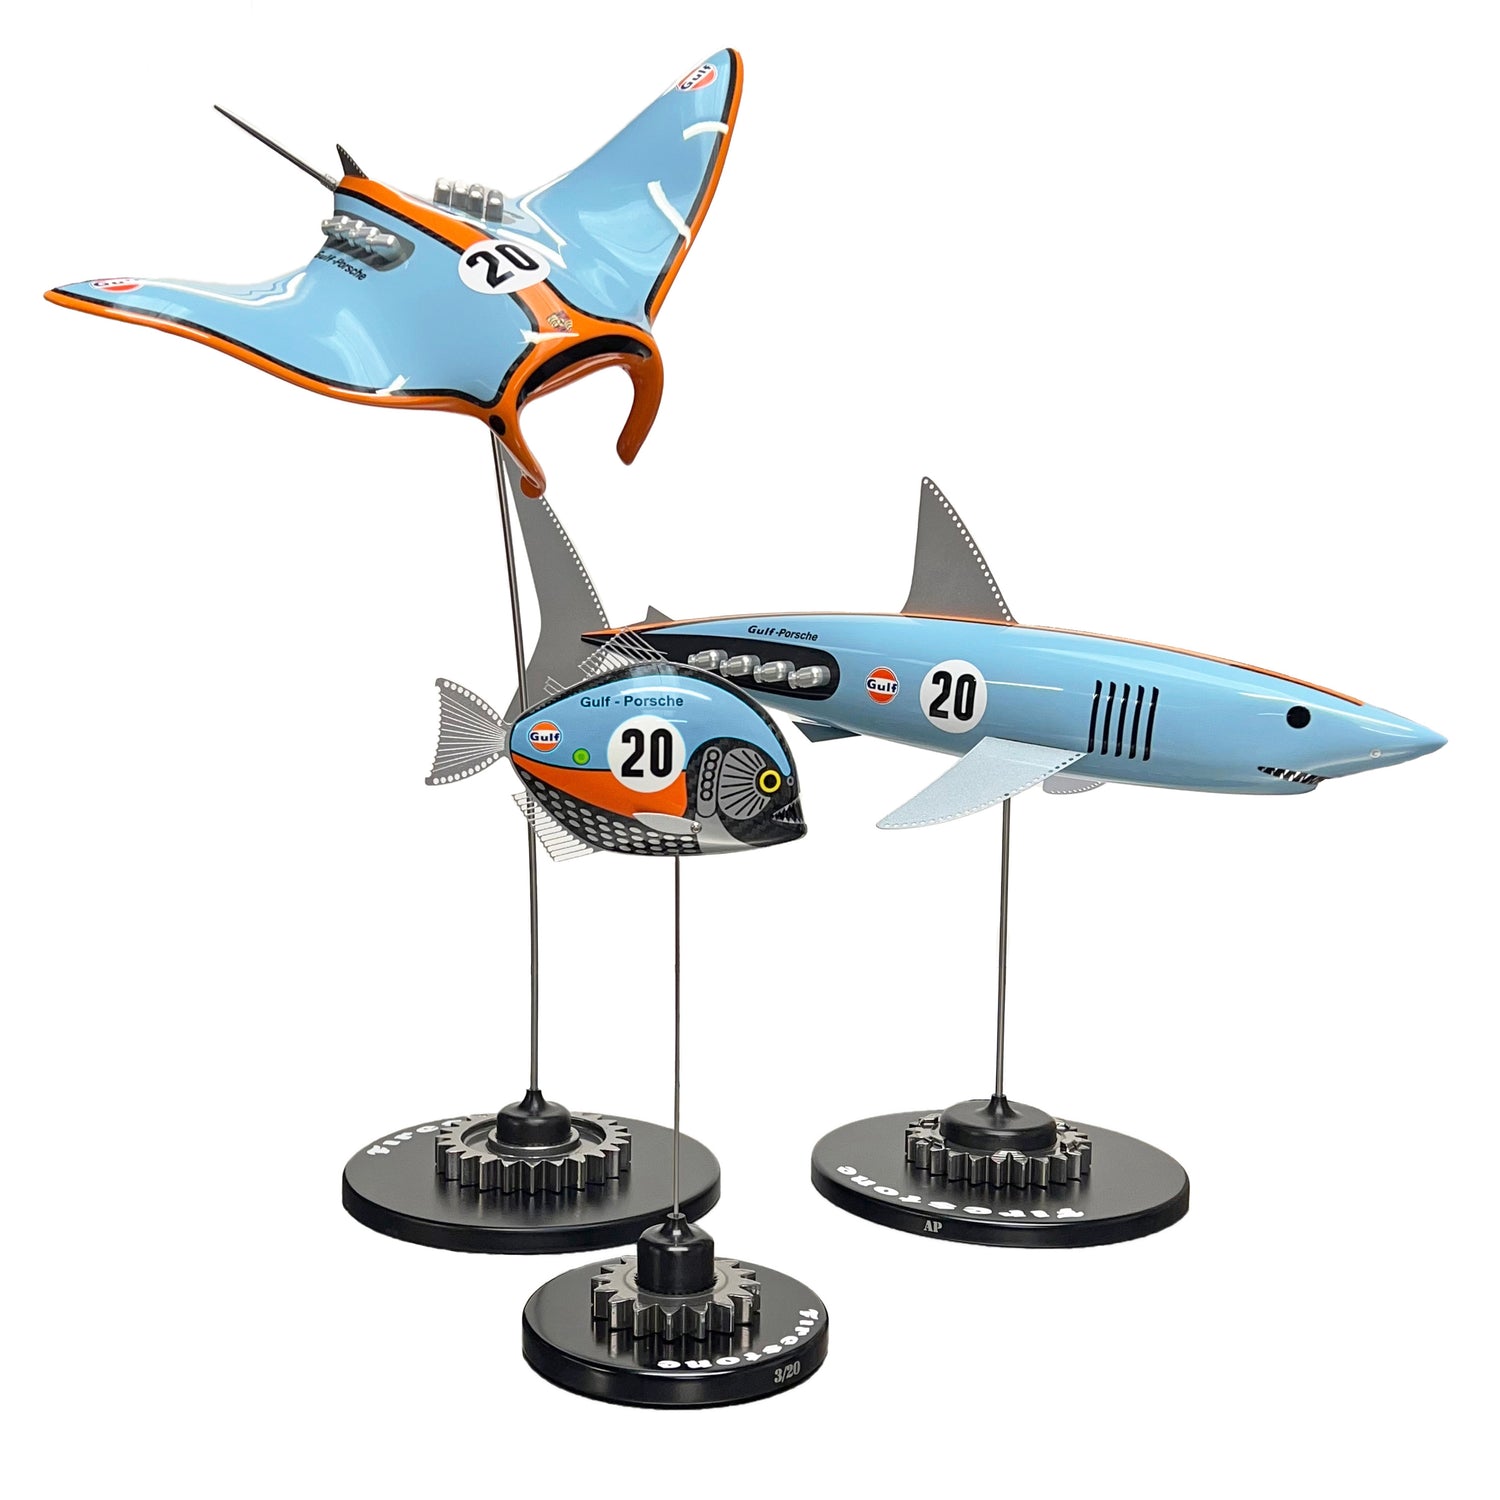 Carbon fibre sculpture collection with Gulf Liveries